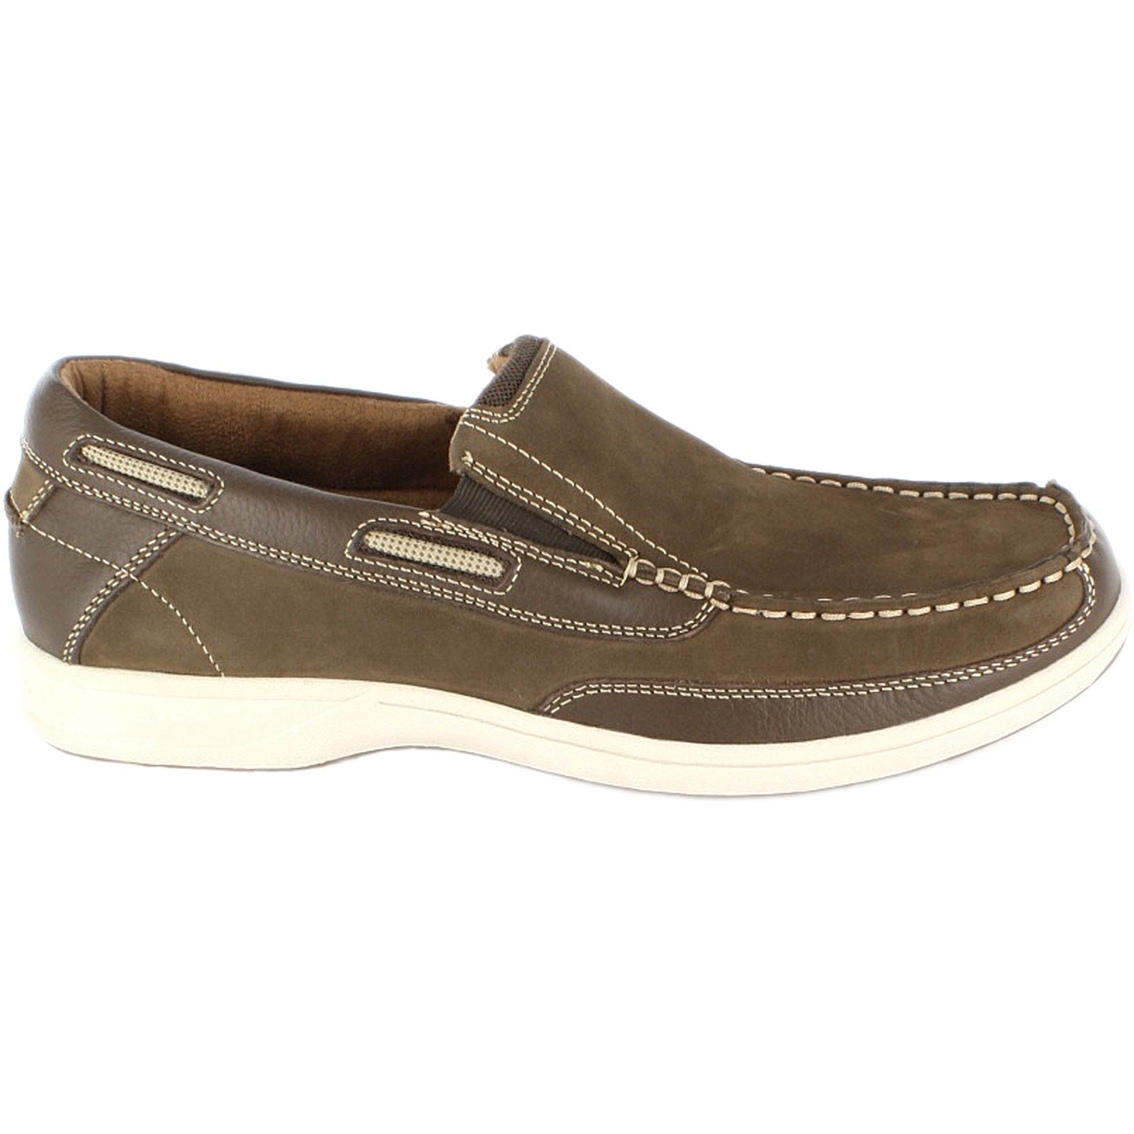 Florsheim Lakeside Slip On Boat Shoes | Casuals | Shoes | Shop The Exchange